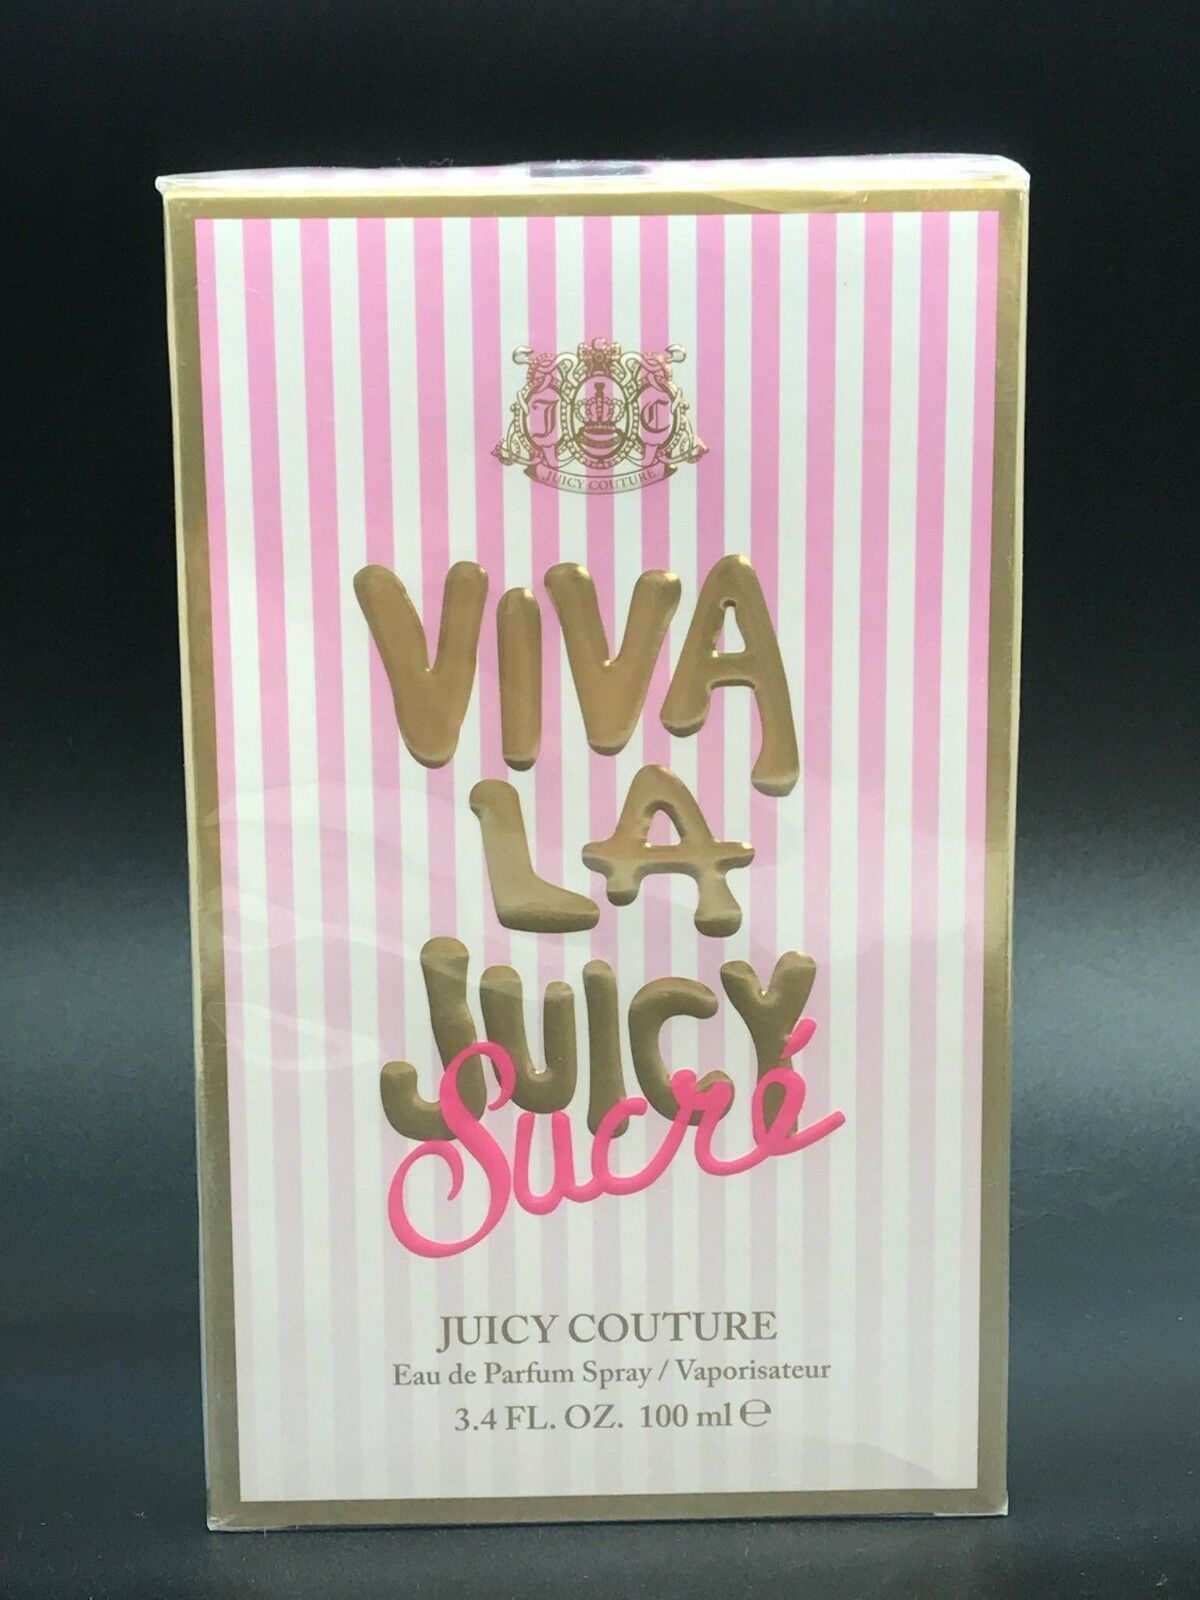 Aaaajuicy couture sucree 3.4 oz edp spray